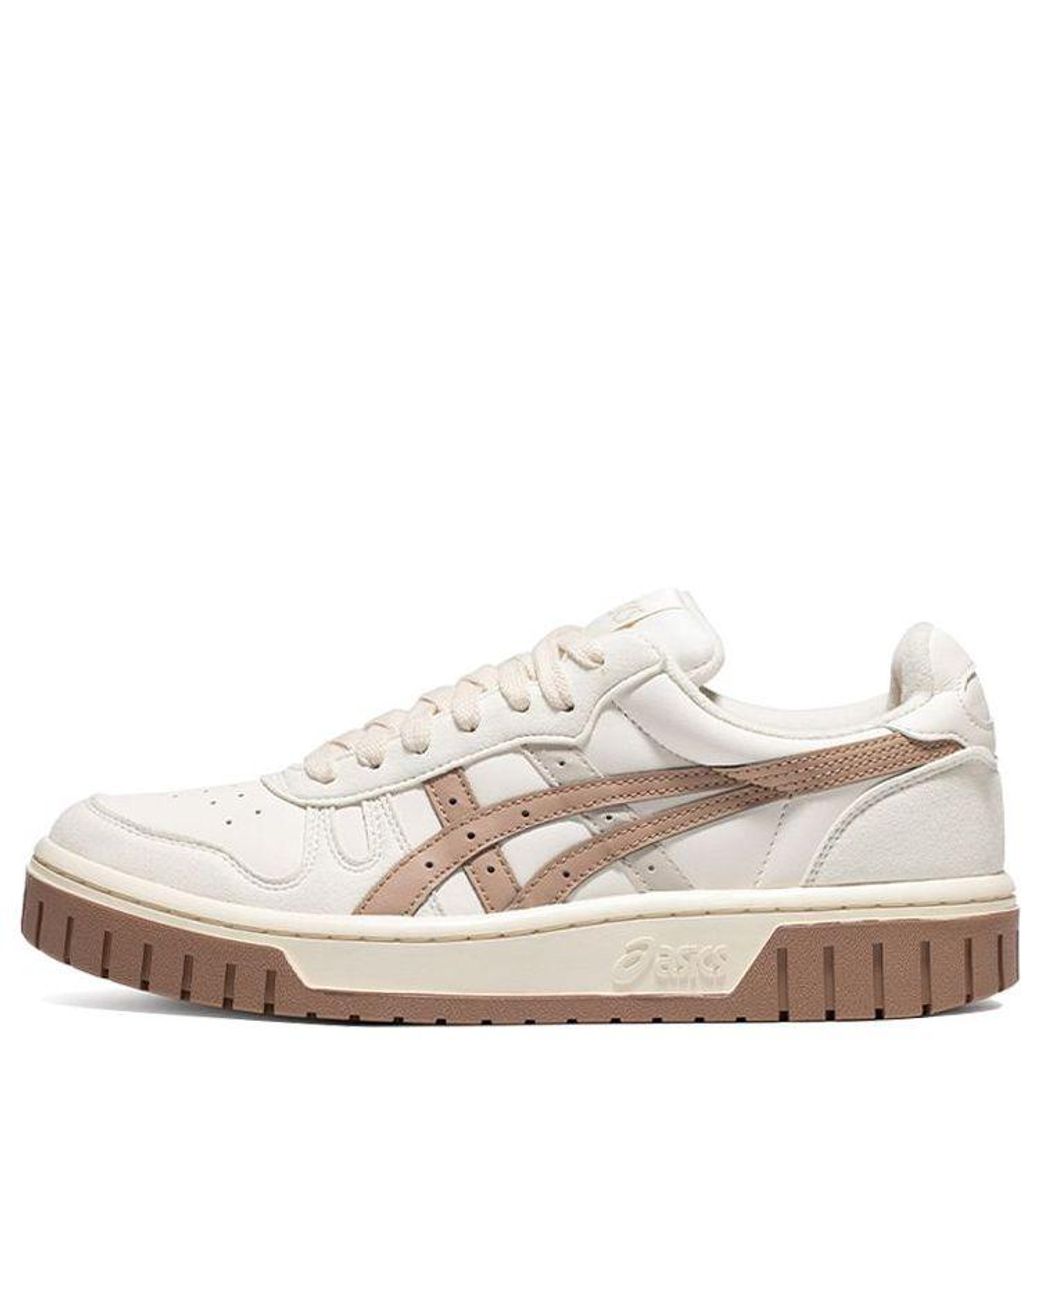 Asics Court Mz Retro Casual Skateboarding Shoes Brown in White | Lyst